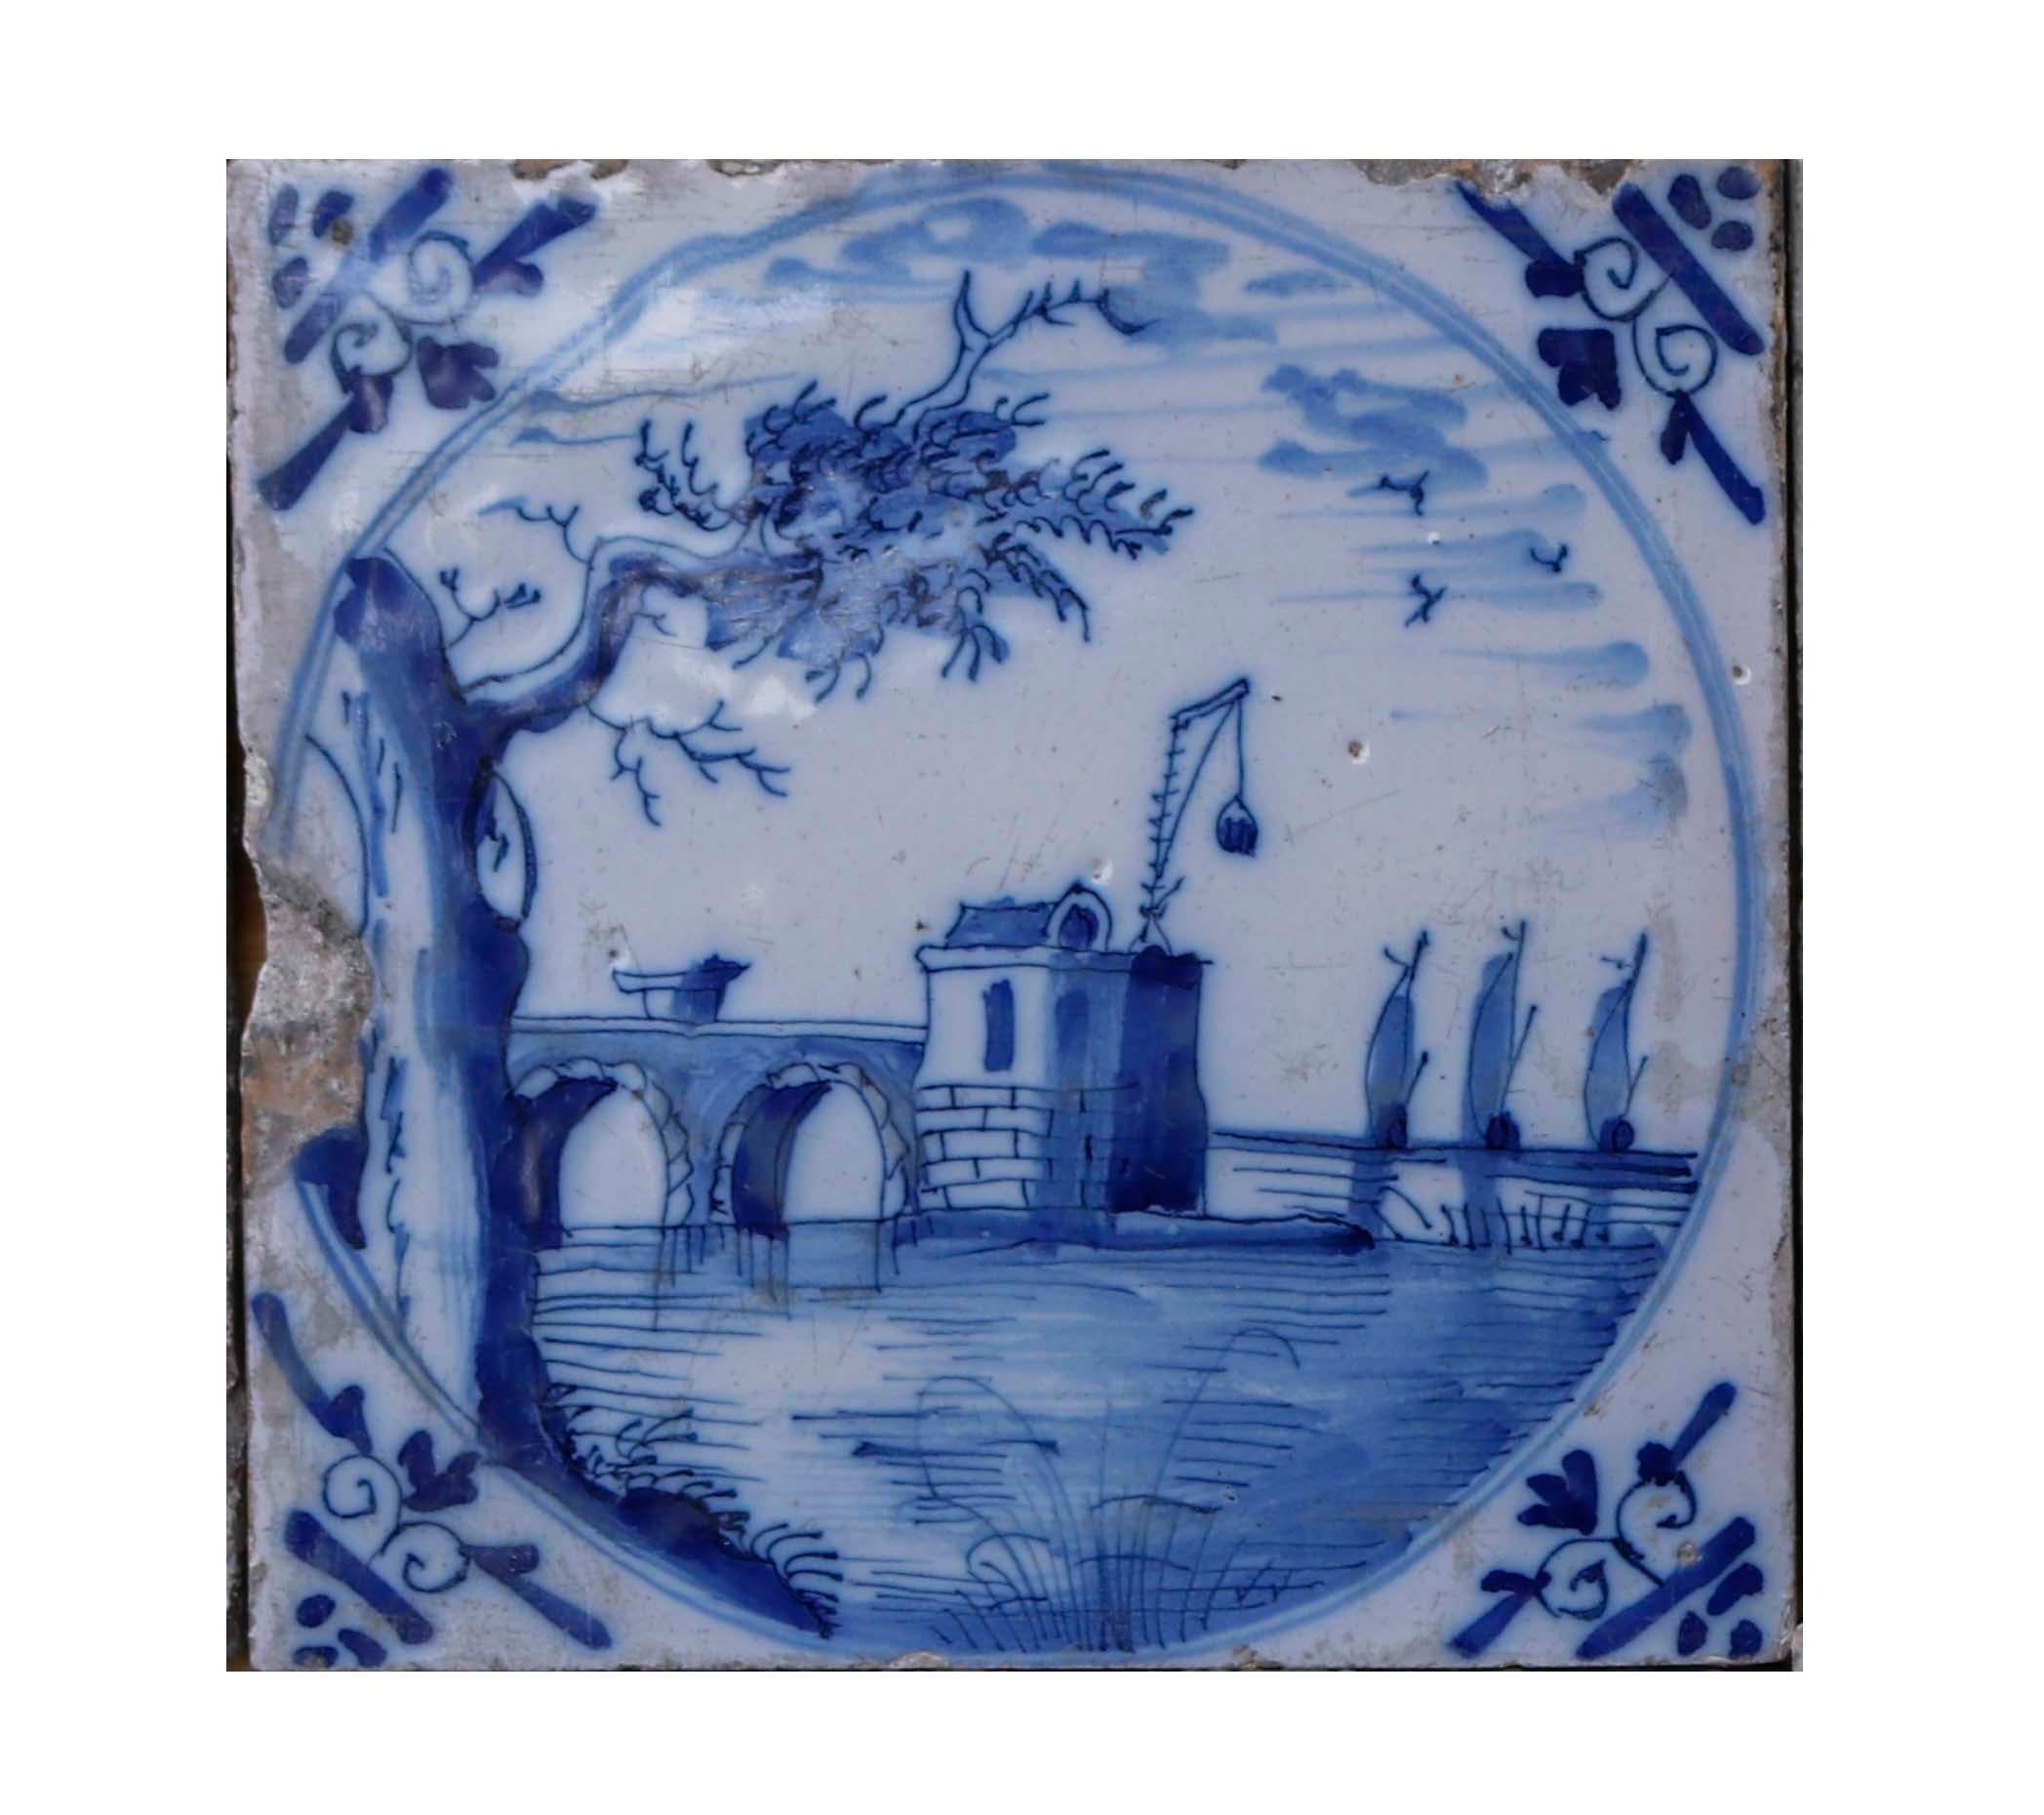 A collection of twelve antique Delft Tiles. A set of tiles depicting Dutch scenes with windmills, maidens and soldiers. All of which are in expressive blue colouring on a white background. Each image provides a wonderful unique illustration.